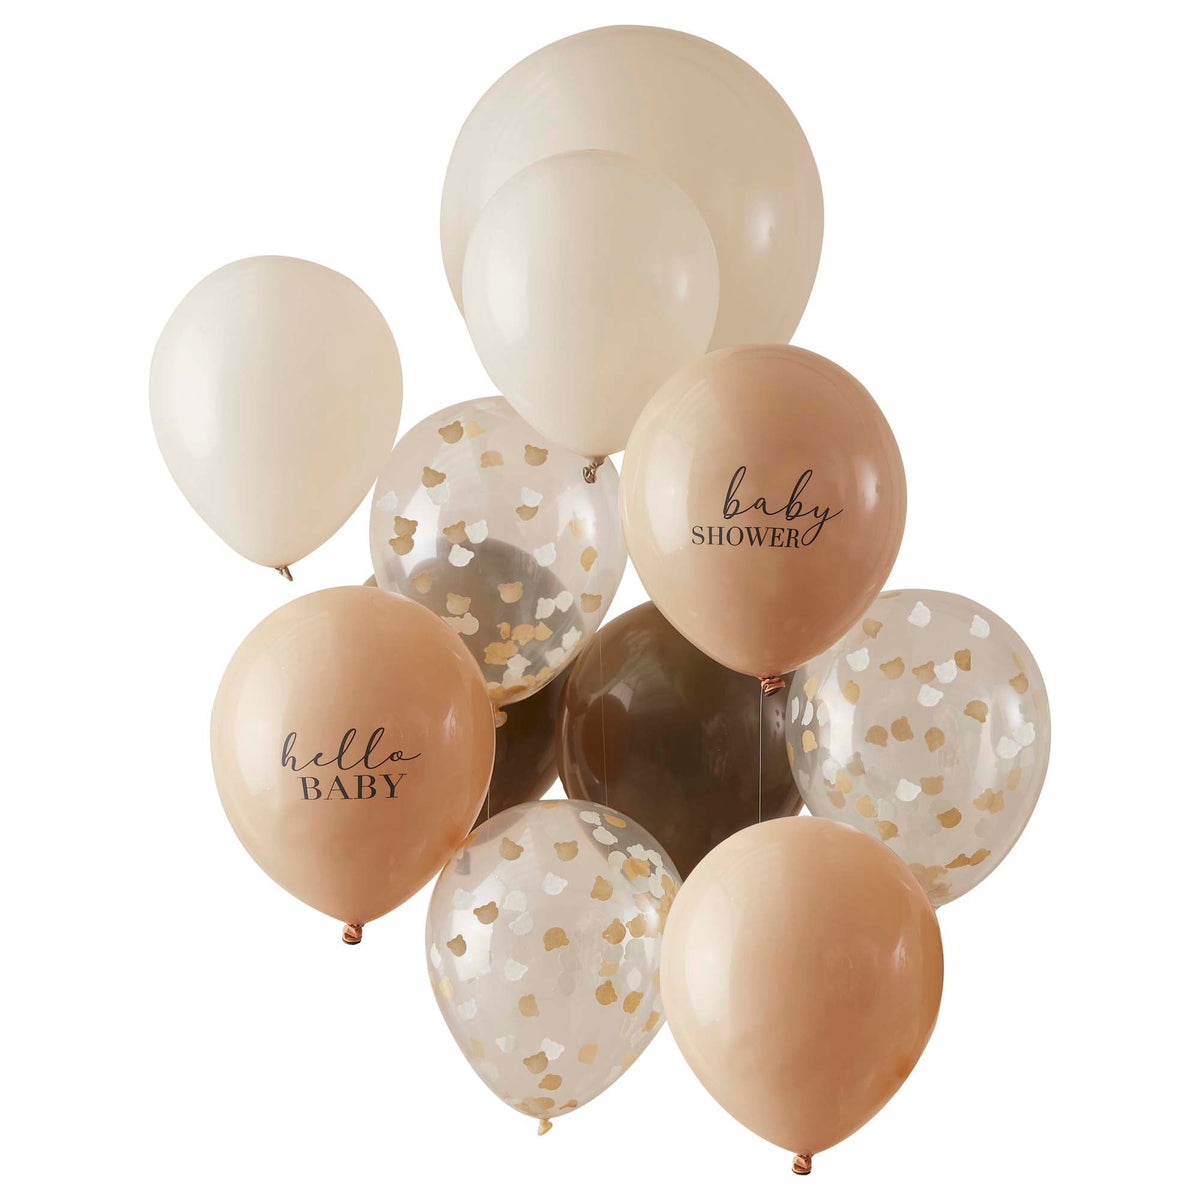 AMSCAN CA Baby Shower Balloon Kit, Brown Ombre, 11 Count